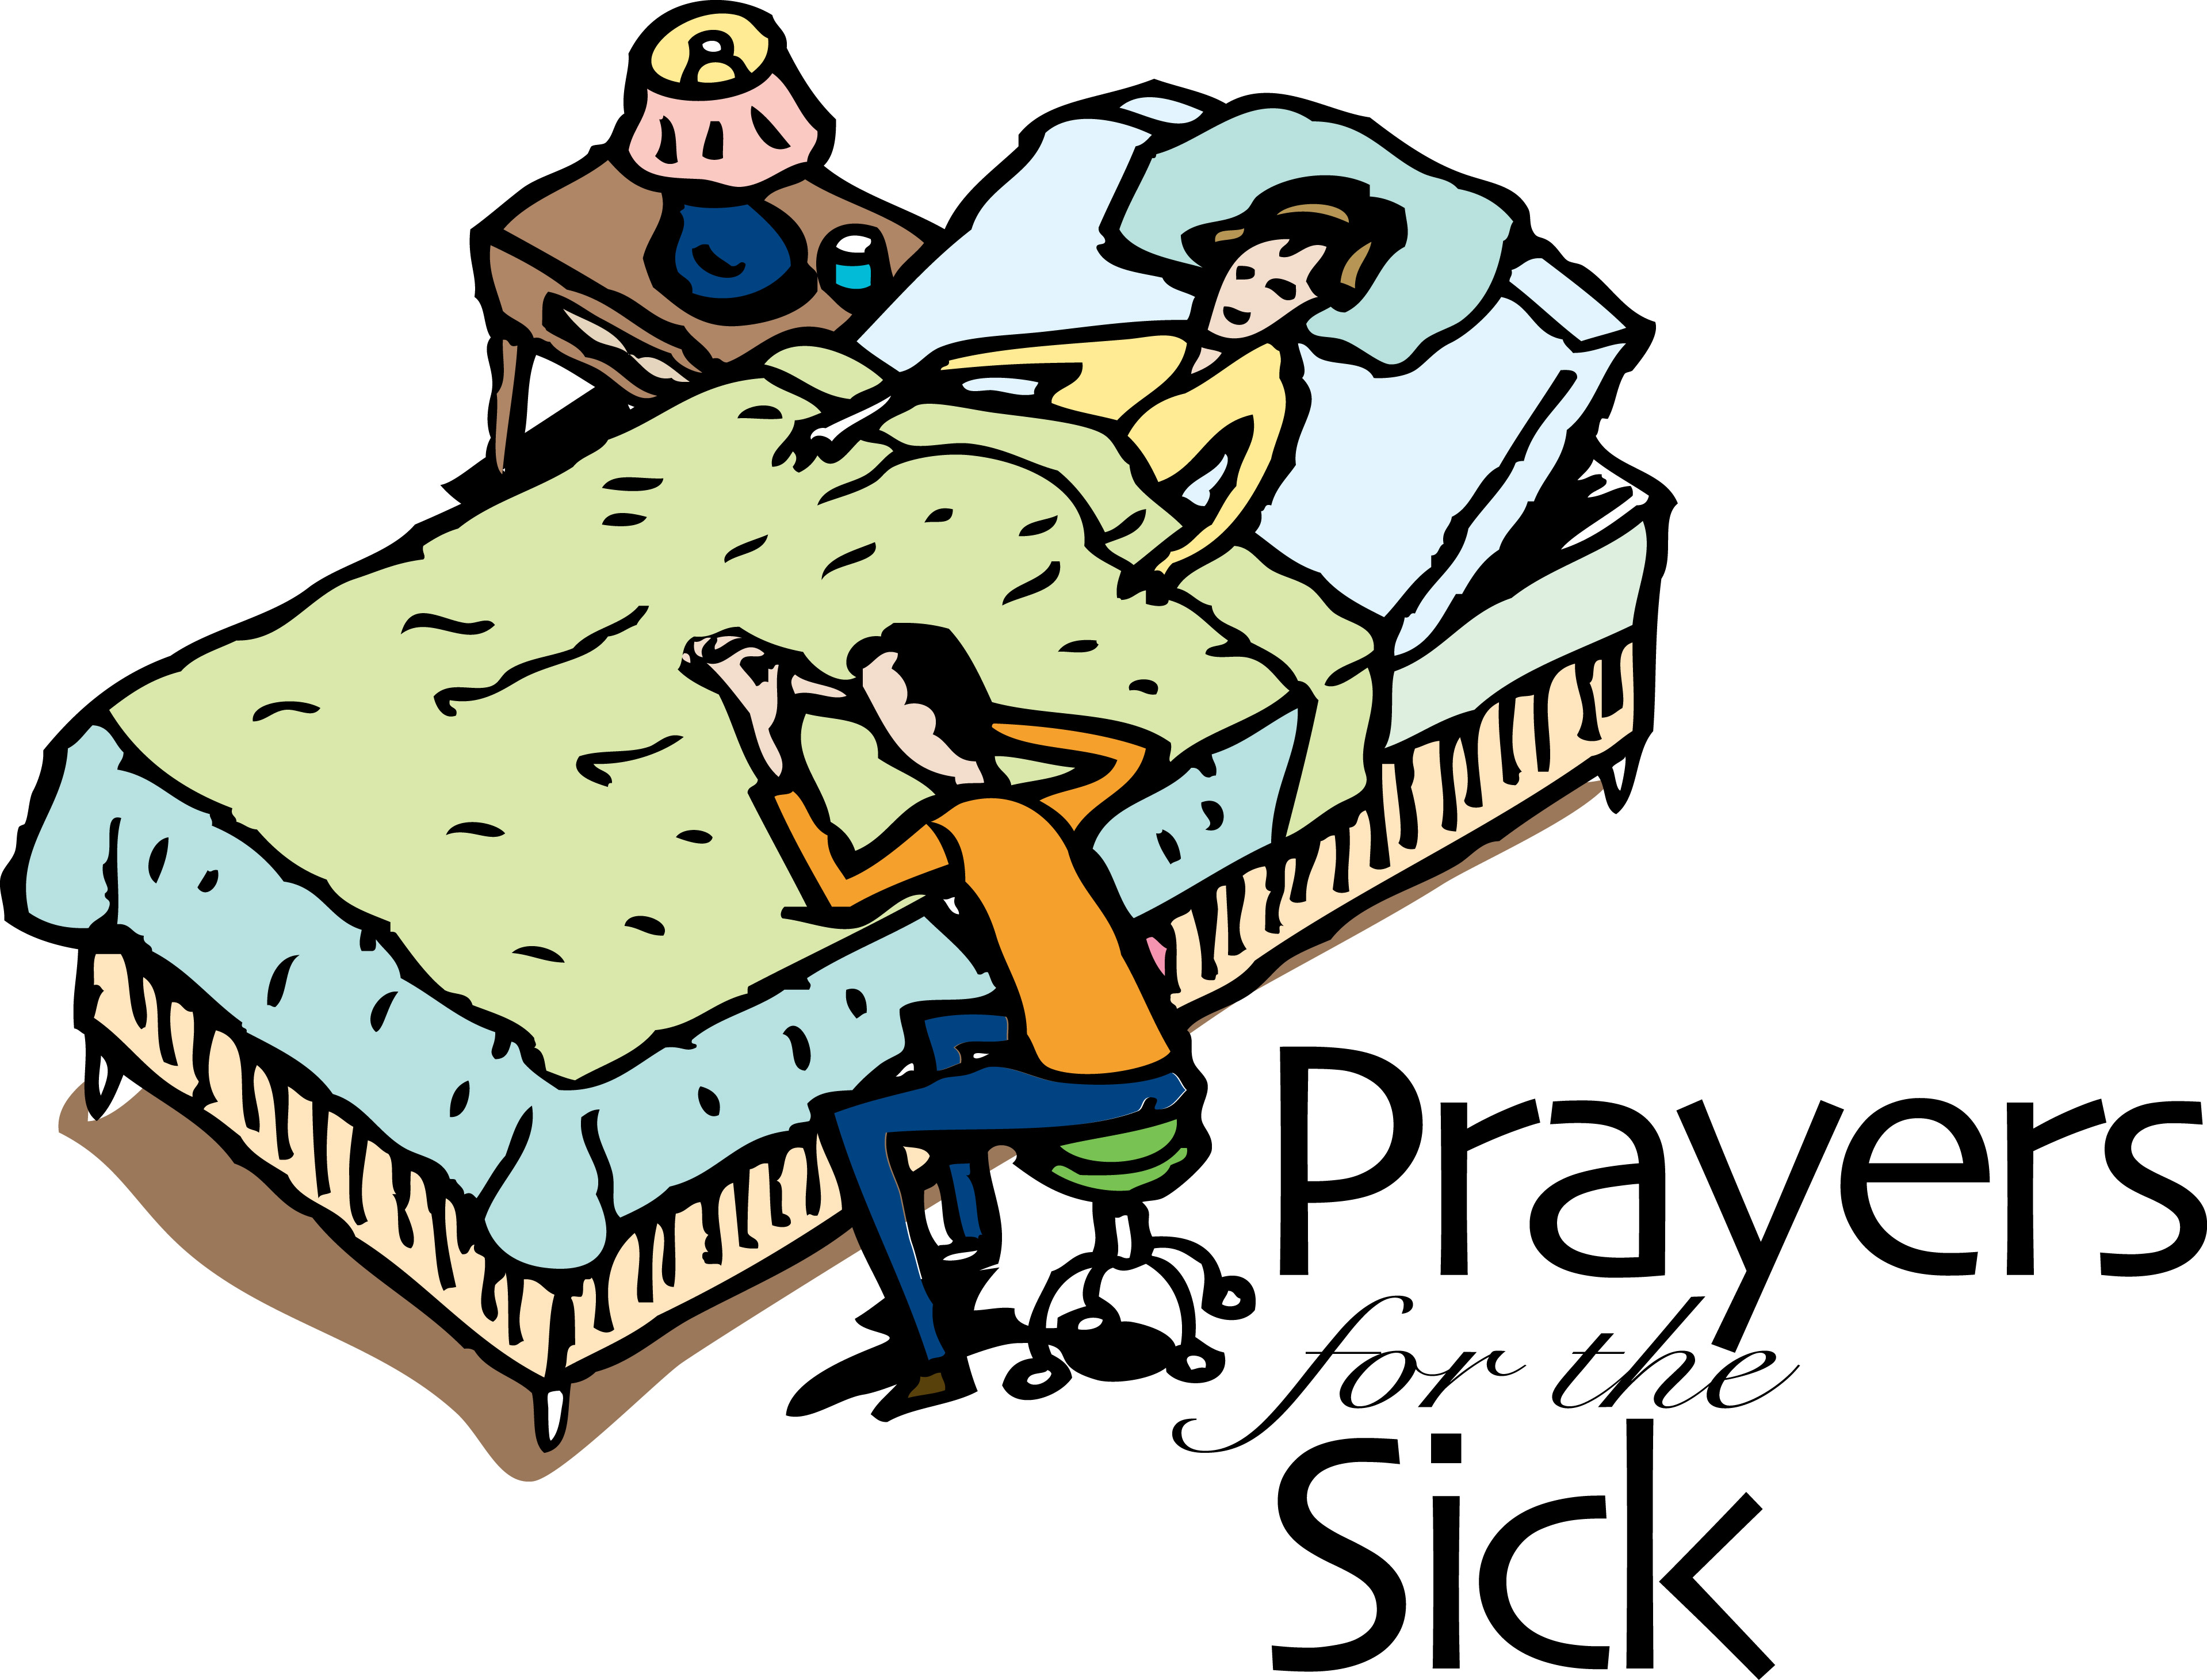 Free wold day of prayer clipart